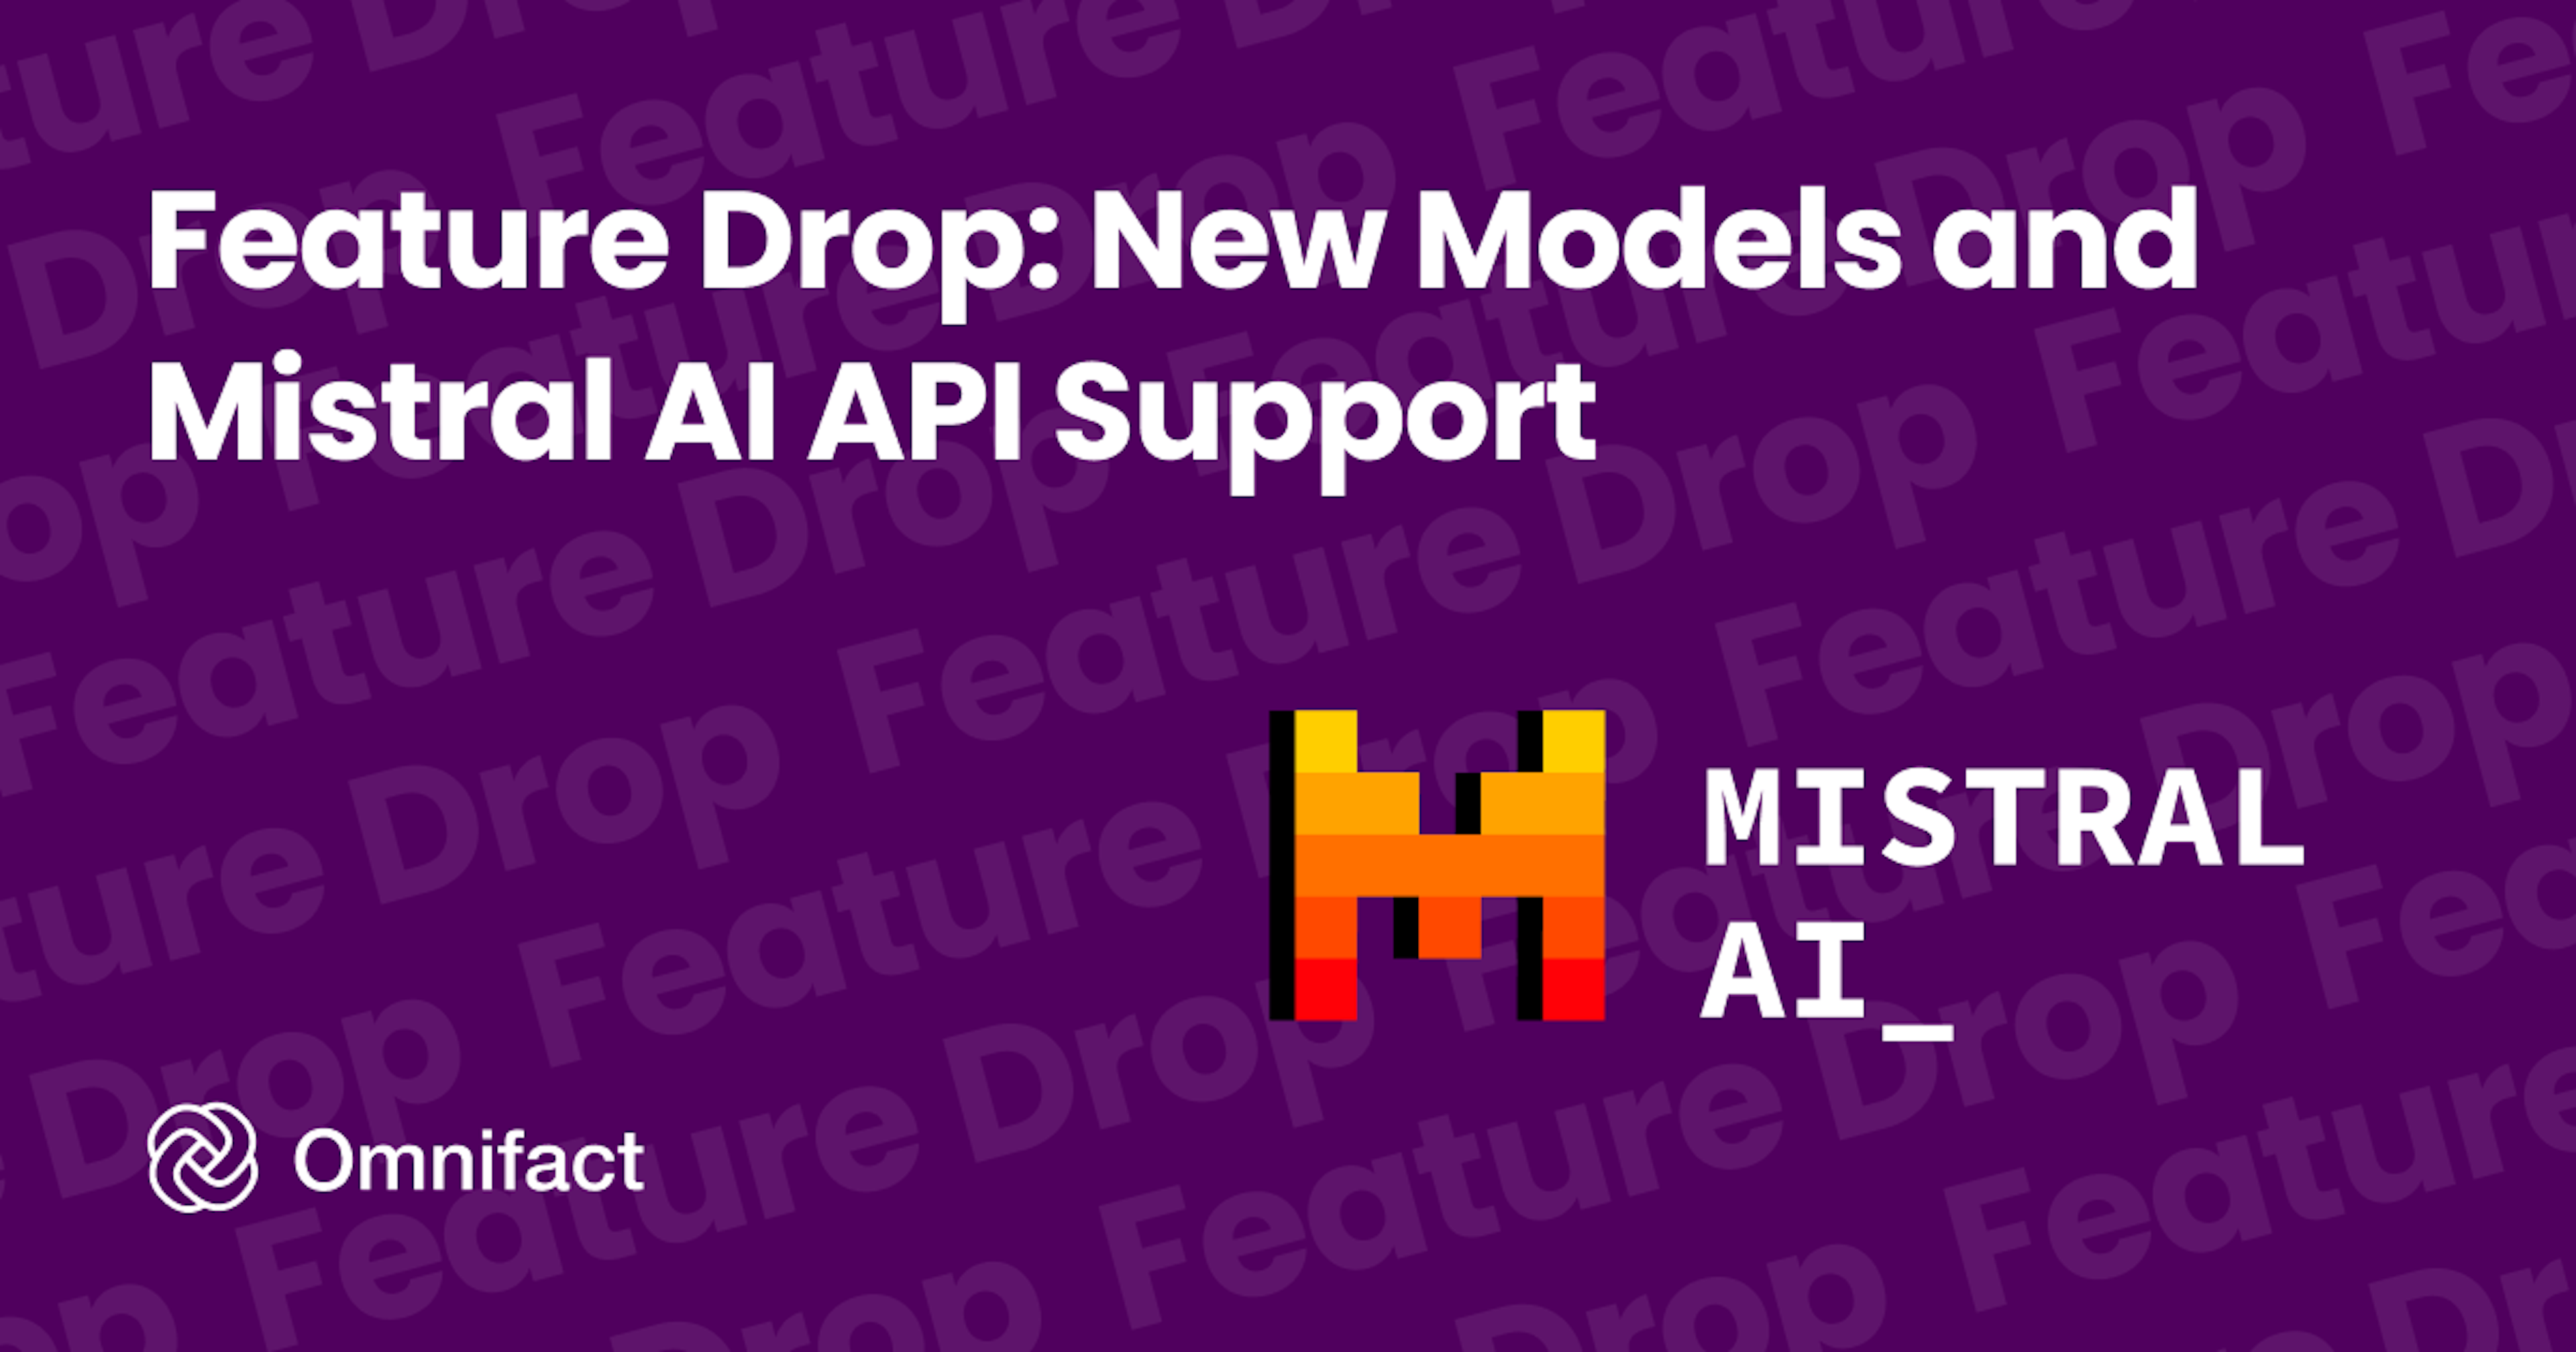 Omnifact now supports the Mistral AI API platform and their family of models.